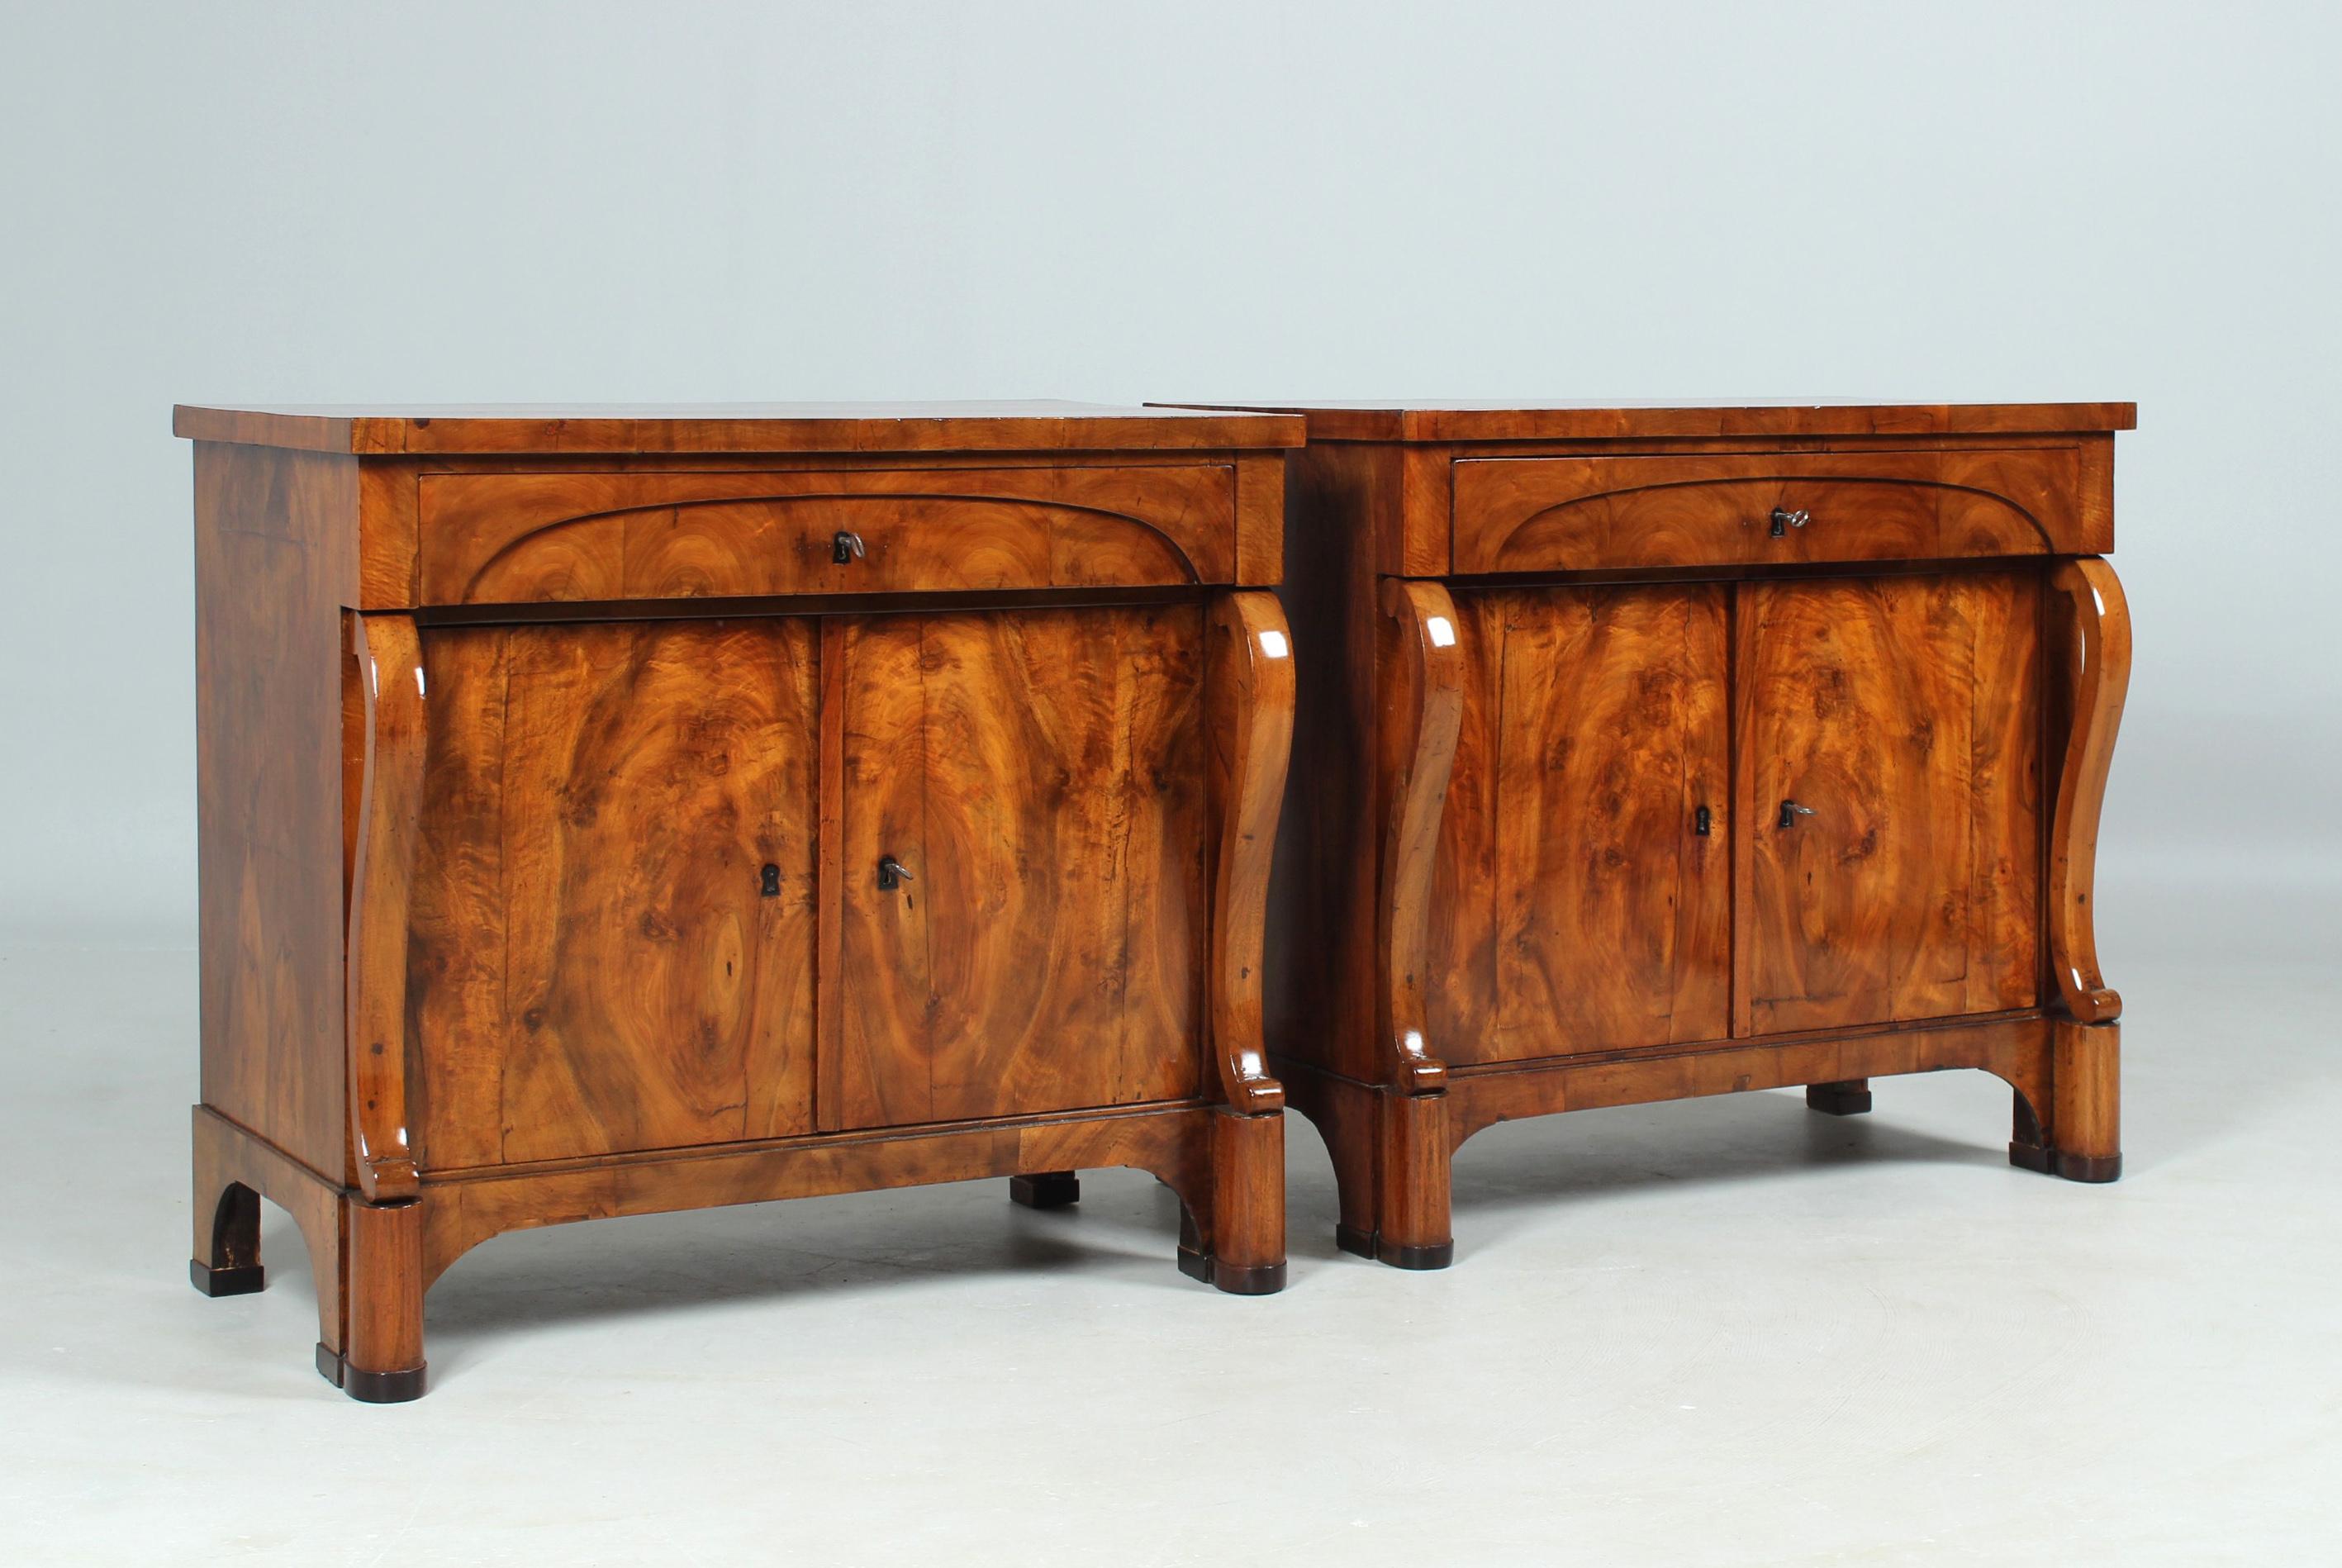 Pair of Biedermeier chests of drawers or sideboards

South Germany (Baden)
Walnut
Biedermeier around 1825

Dimensions: H x W x D: 84 x 92 x 51 cm each

Description:
Extremely rare pair of two identical sideboards in walnut veneered on softwood.

The